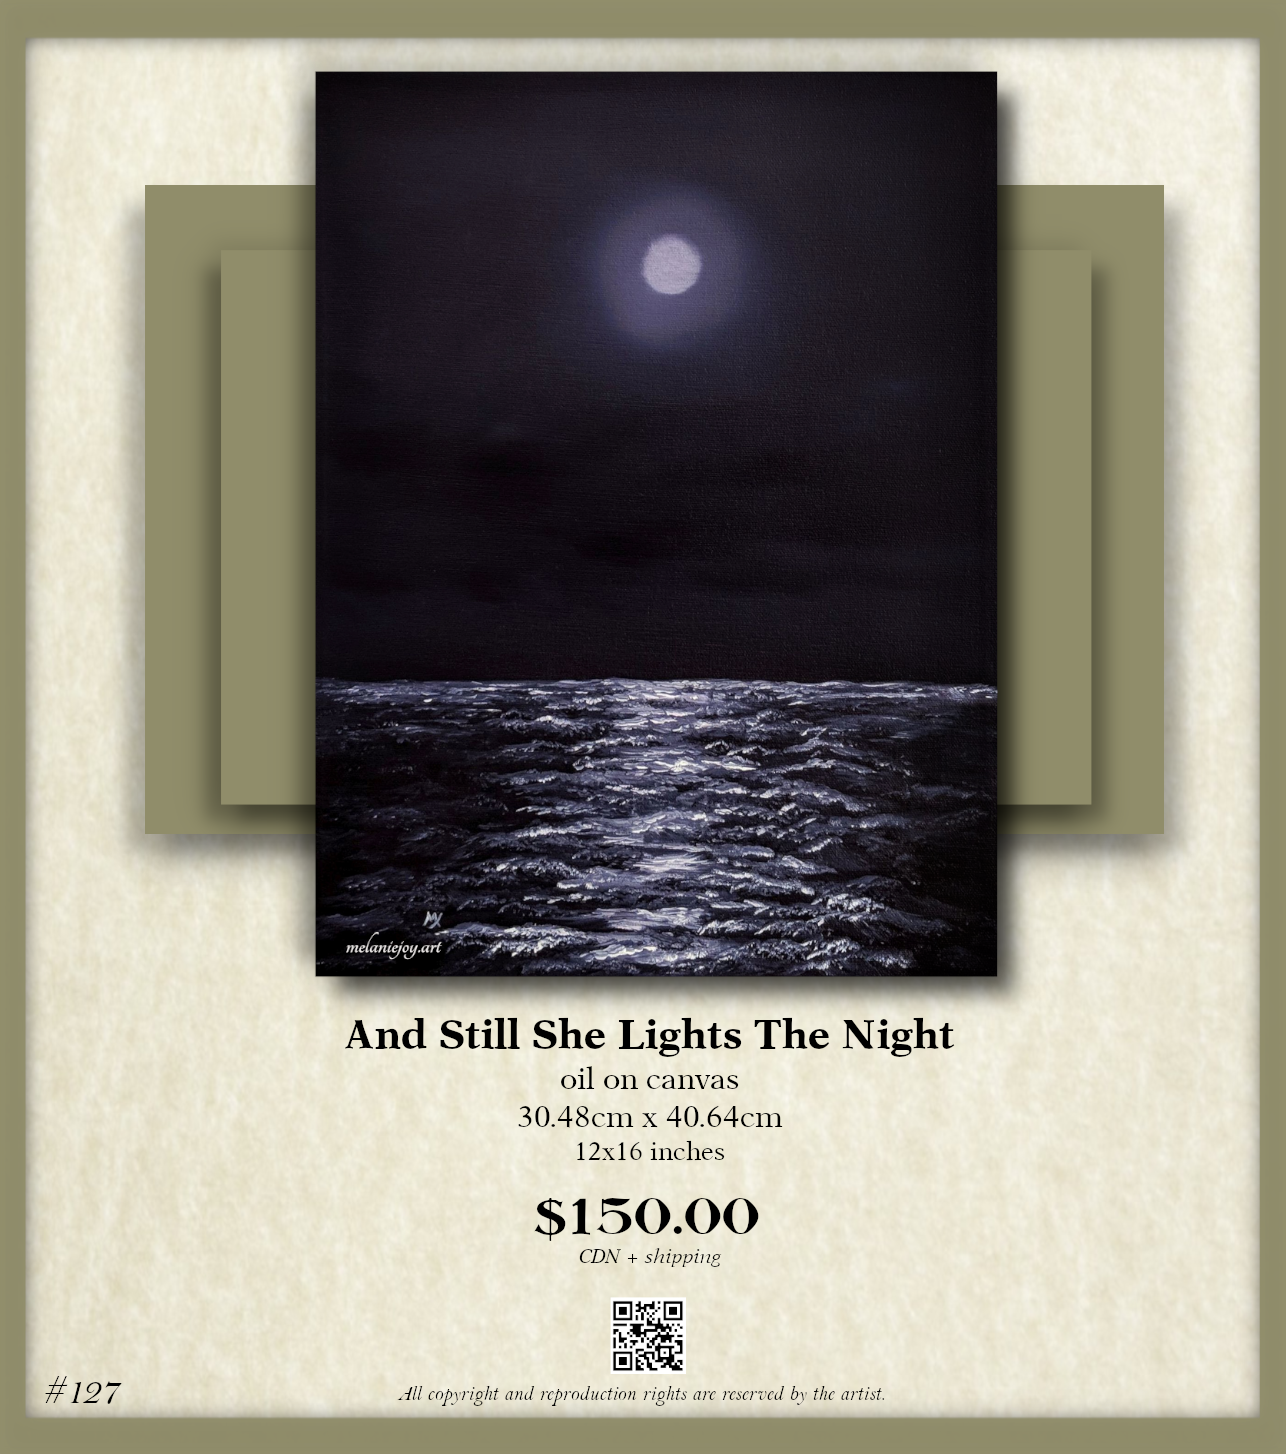 And Still She Lights The Night oil on canvas$150.00 for sale melaniejoy.art